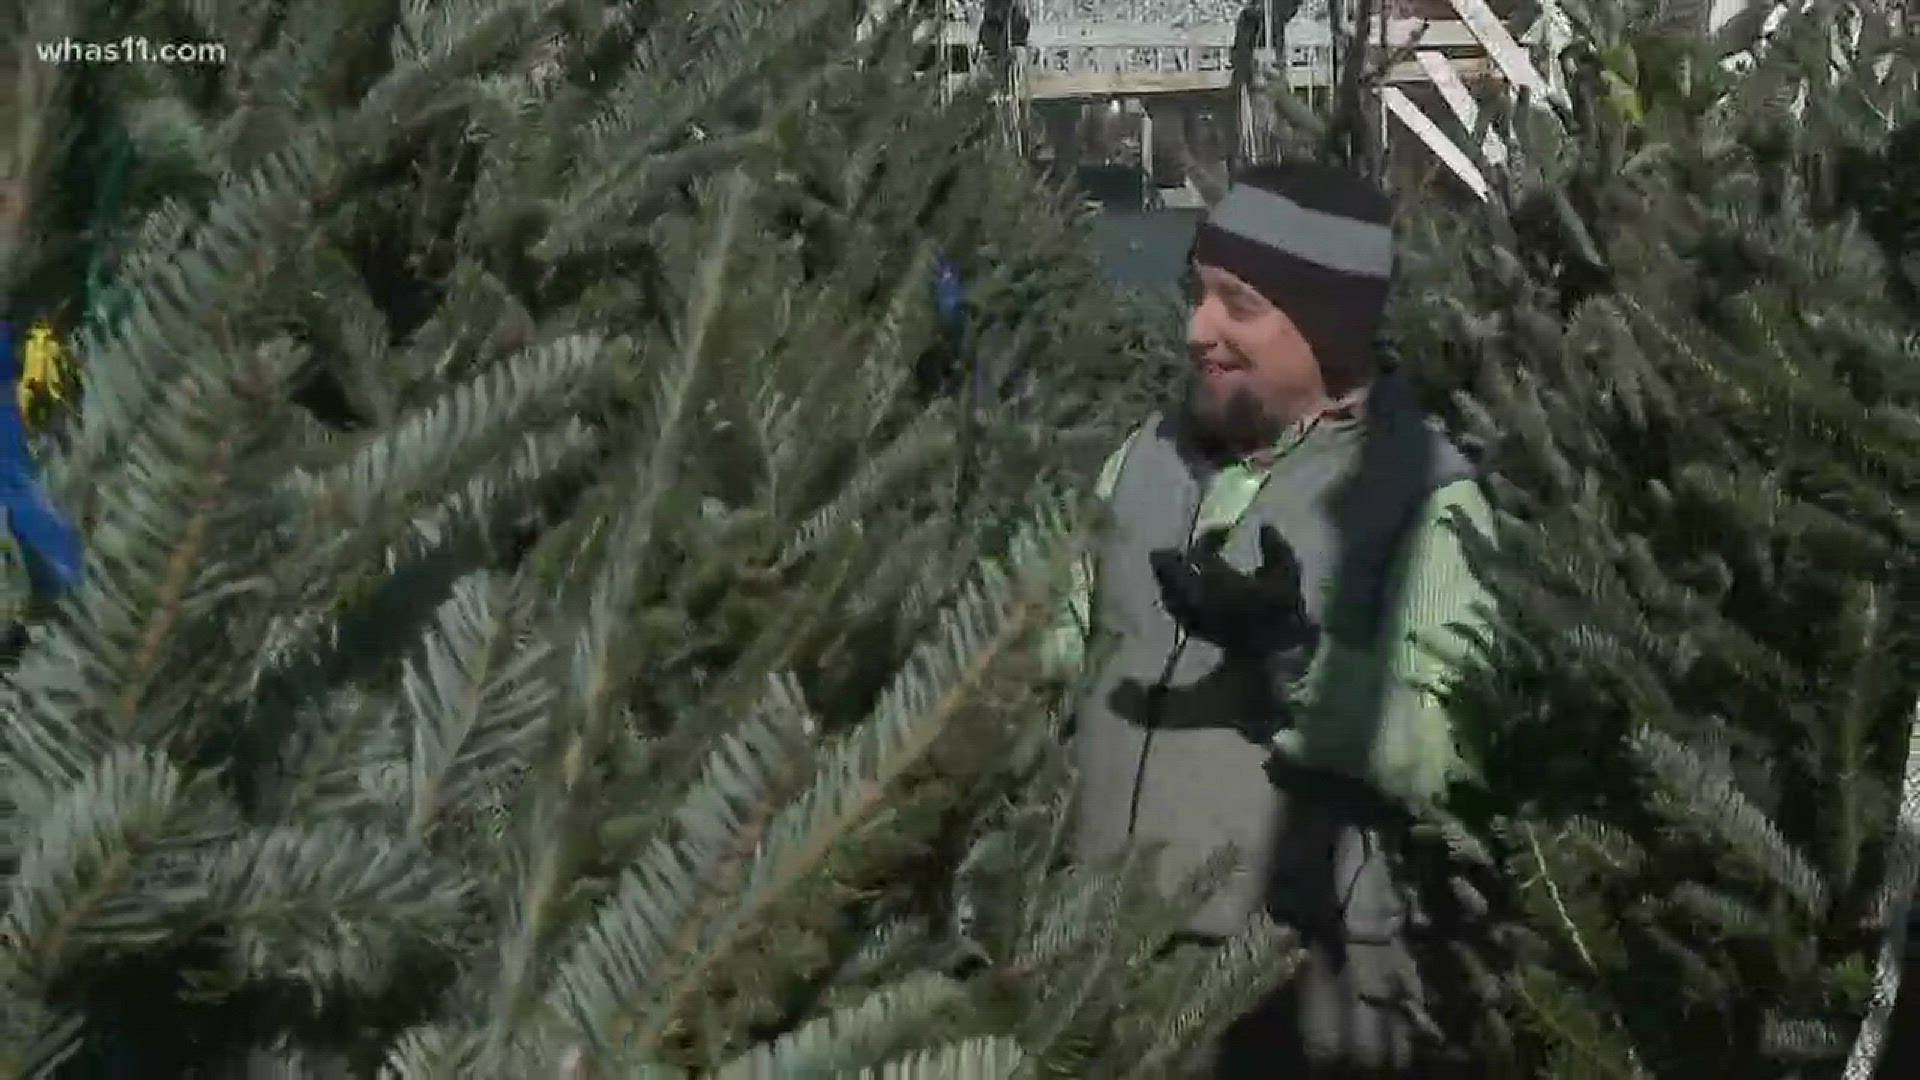 Verify: real or fake trees